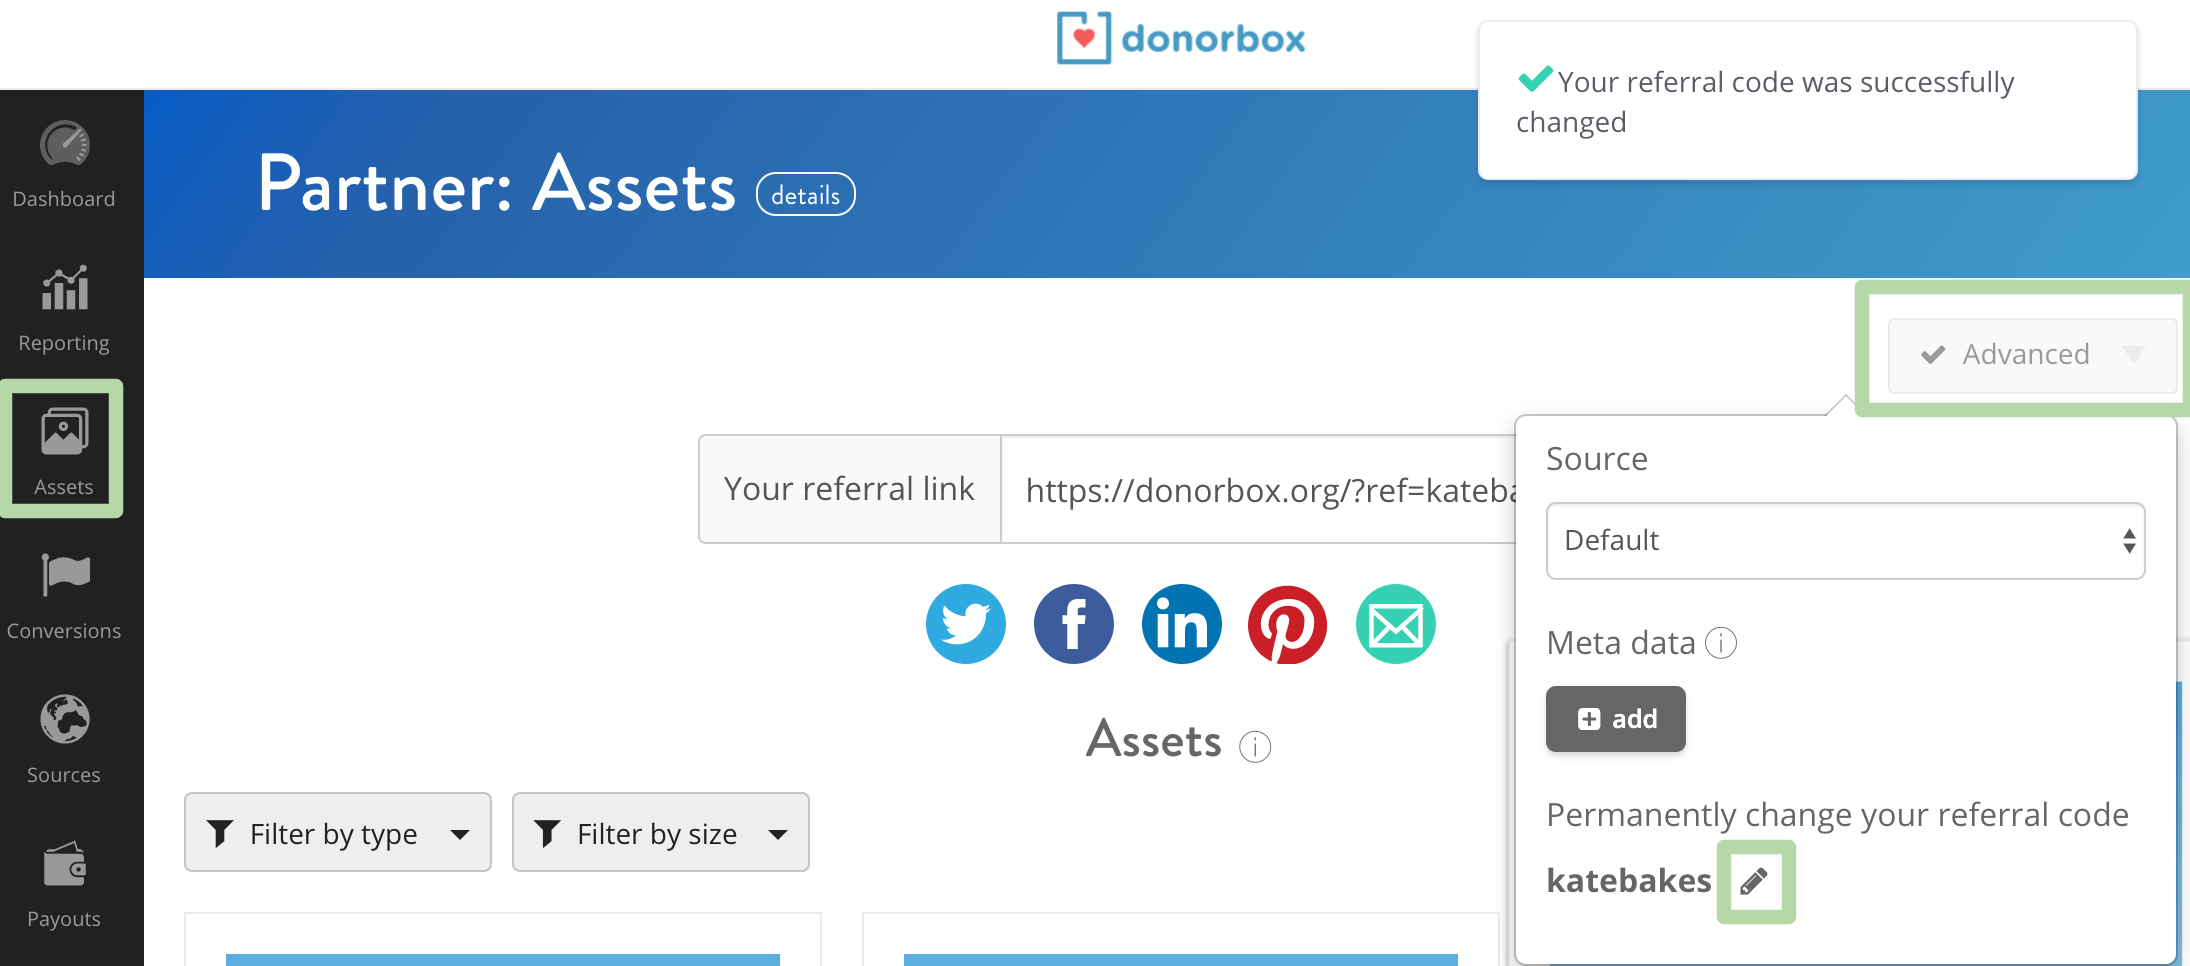 Partner-Assets-Donorbox.png